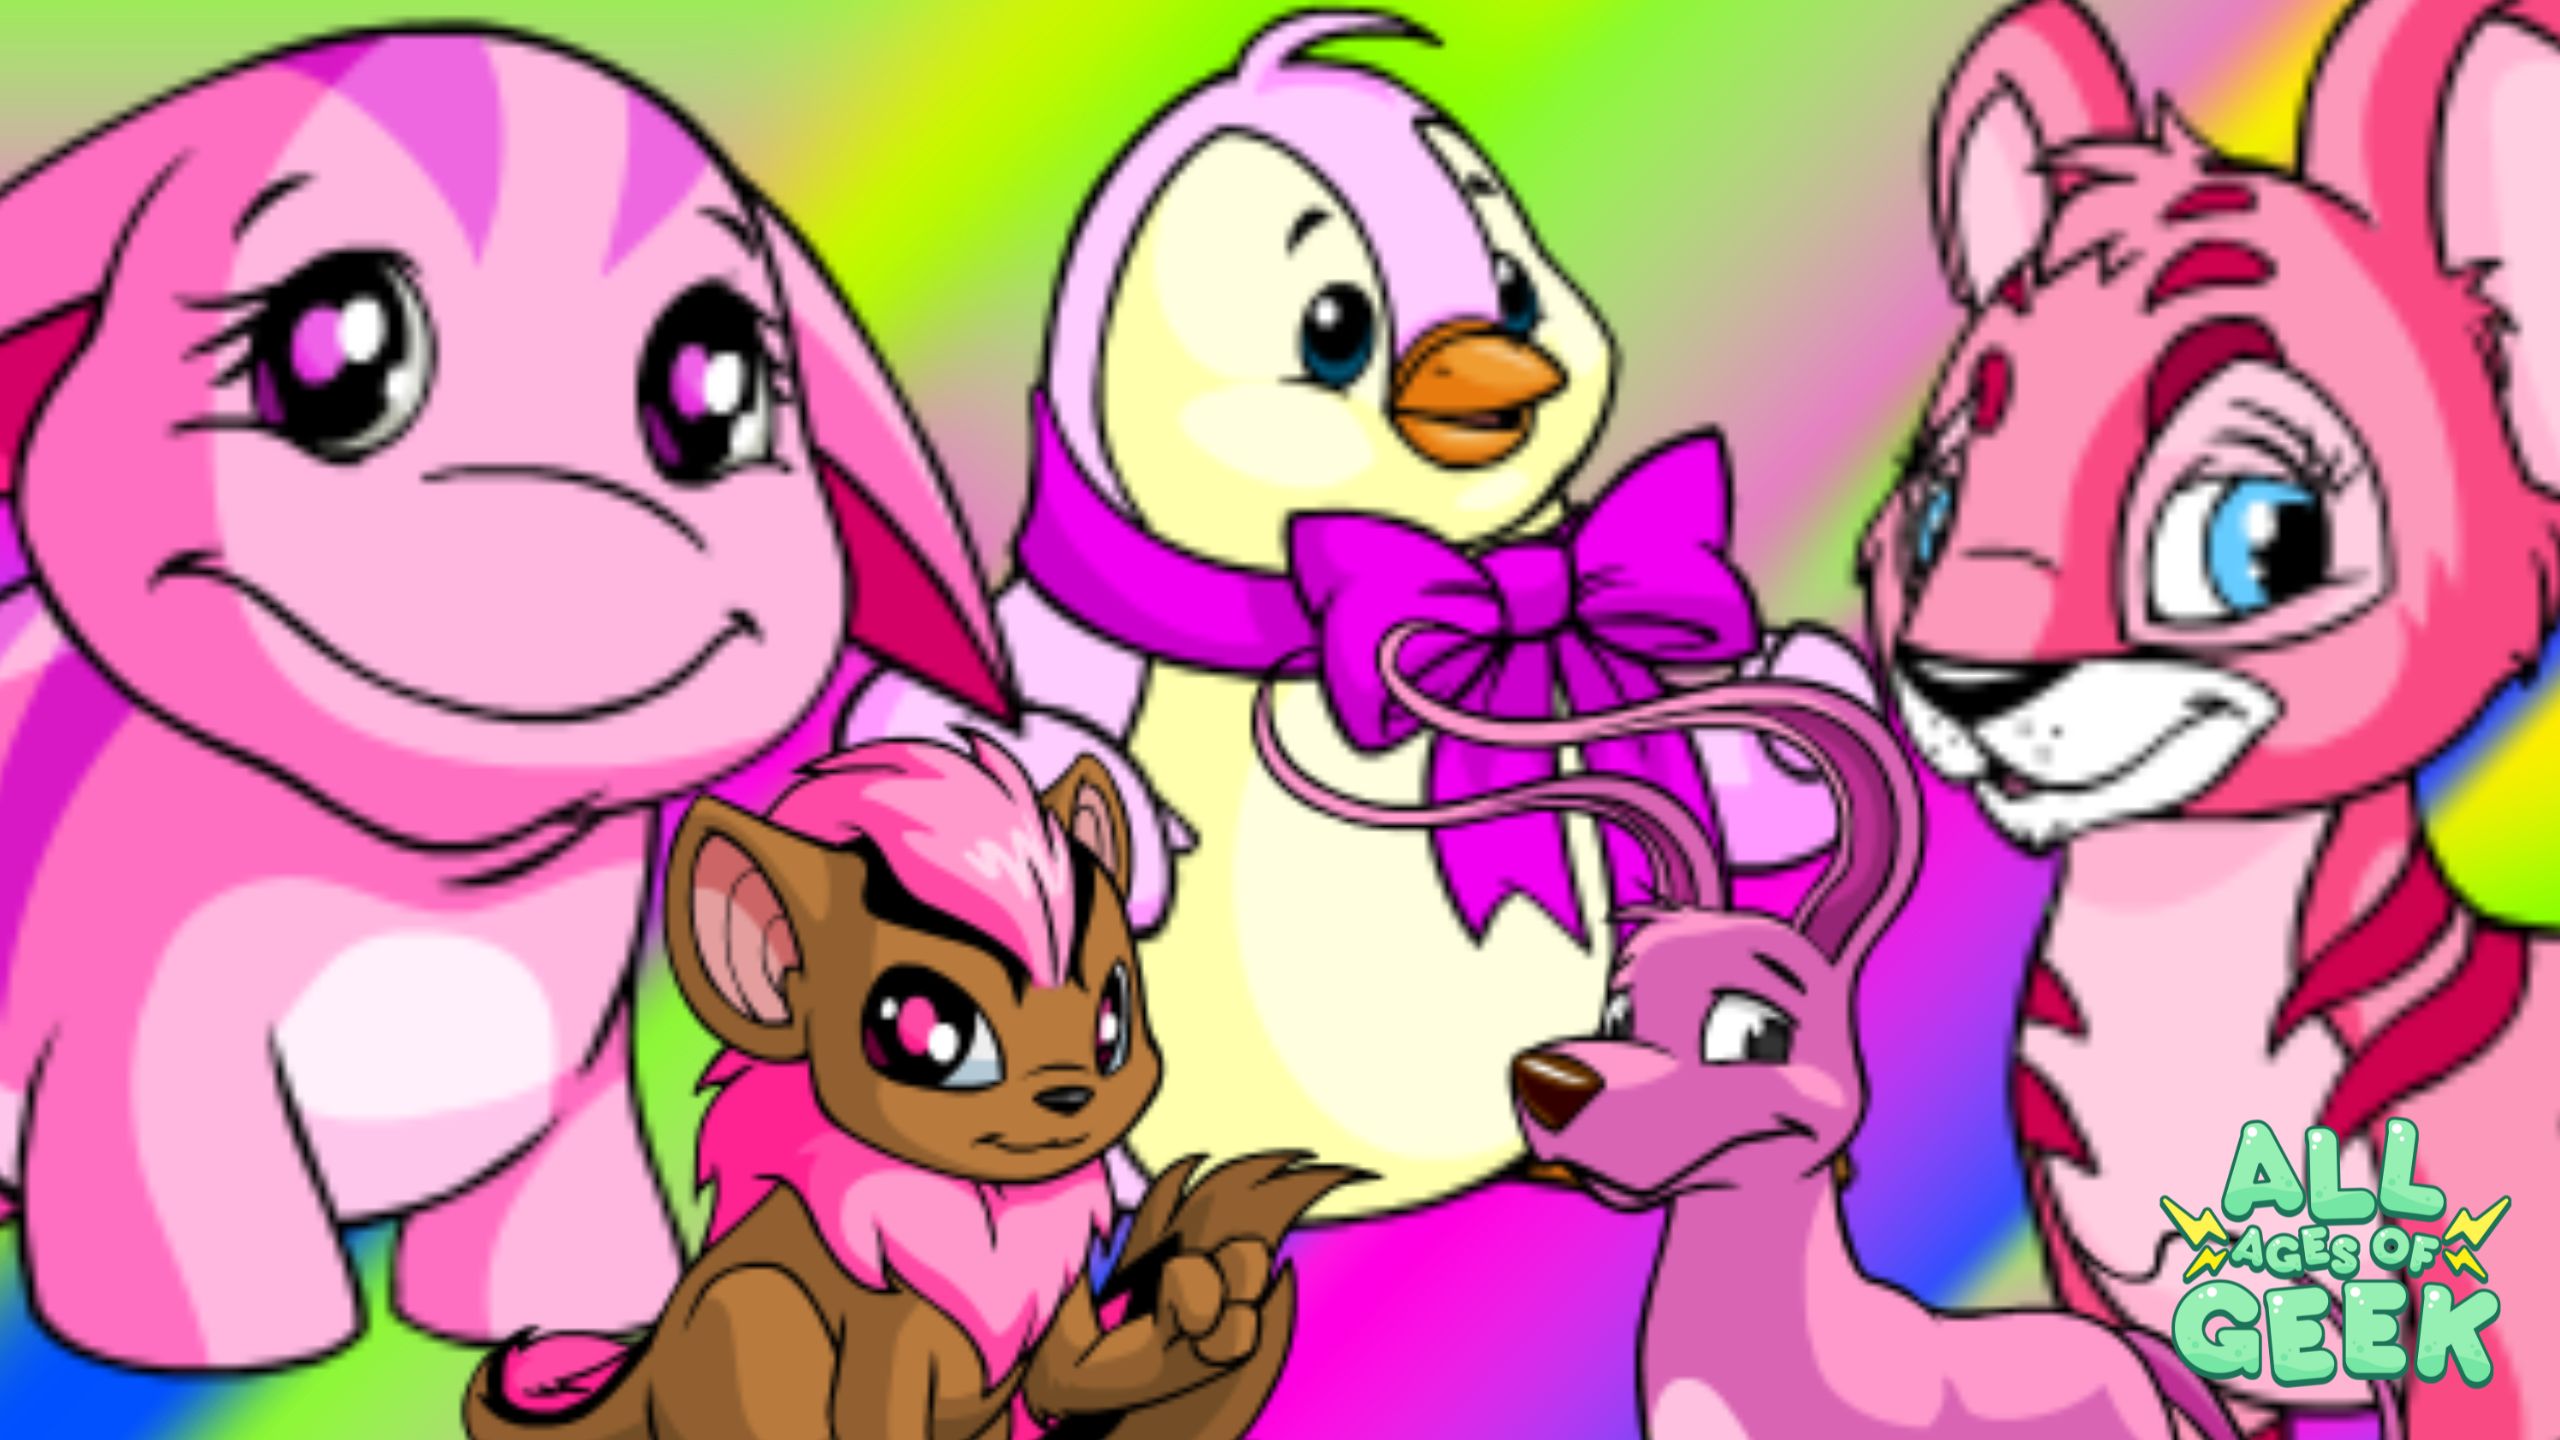 5 Cute Pink Neopets to Love Recommended by All Ages of Geek